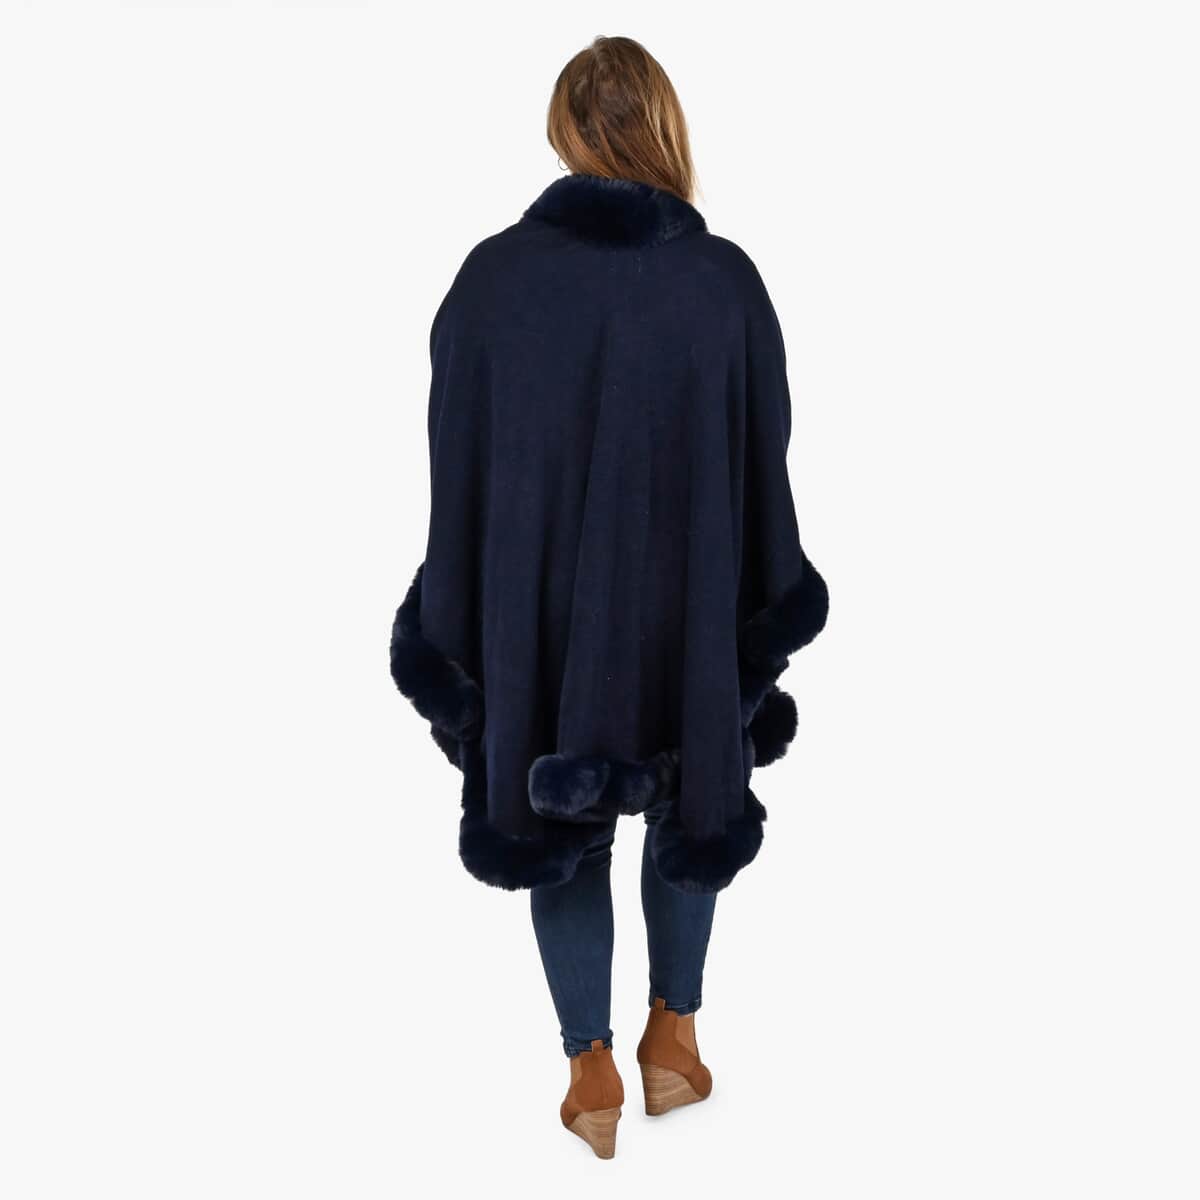 Designer Inspired Navy Ruana with Faux Fur Trim - One Size Fits Most image number 1